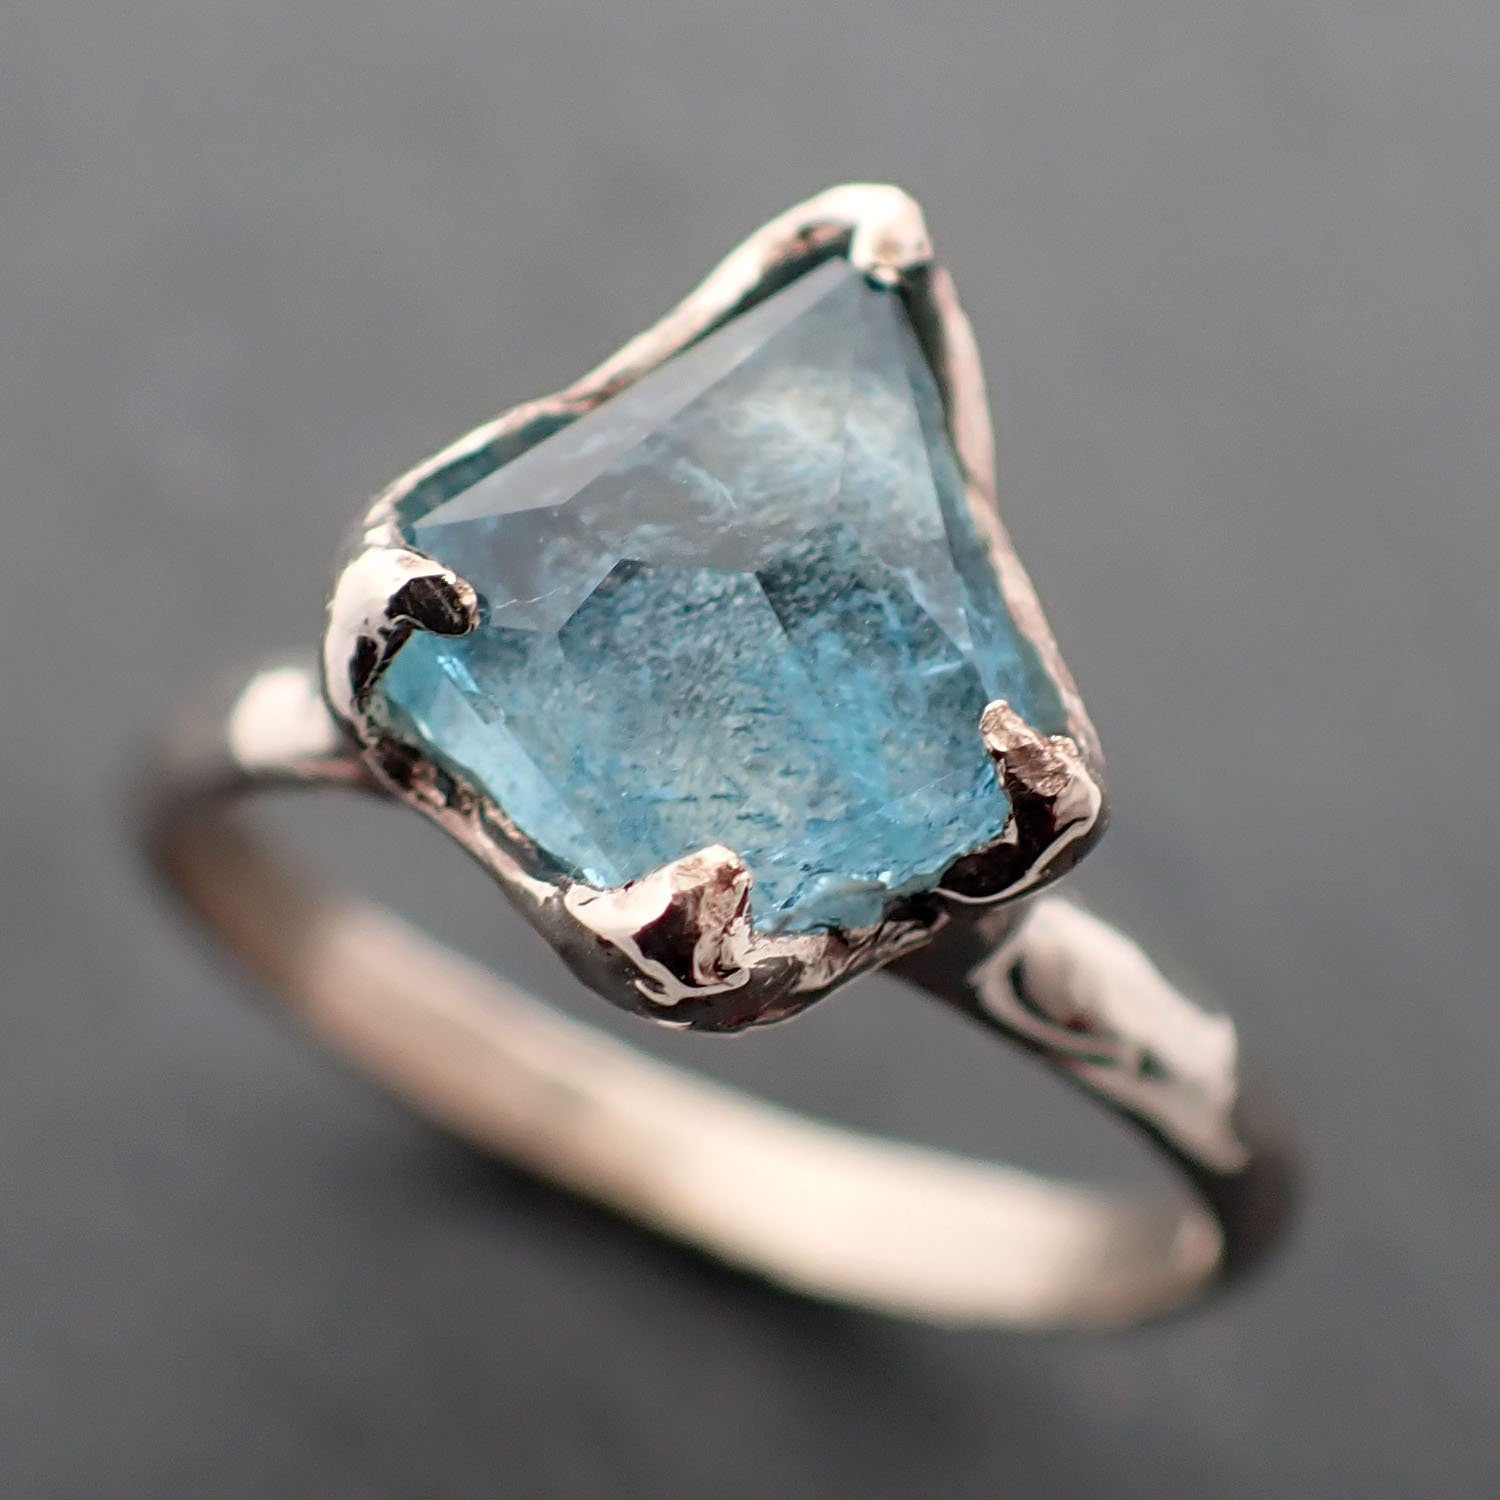 Partially faceted Aquamarine Solitaire Ring 18k gold Custom One Of a Kind Gemstone Ring Bespoke byAngeline 3356